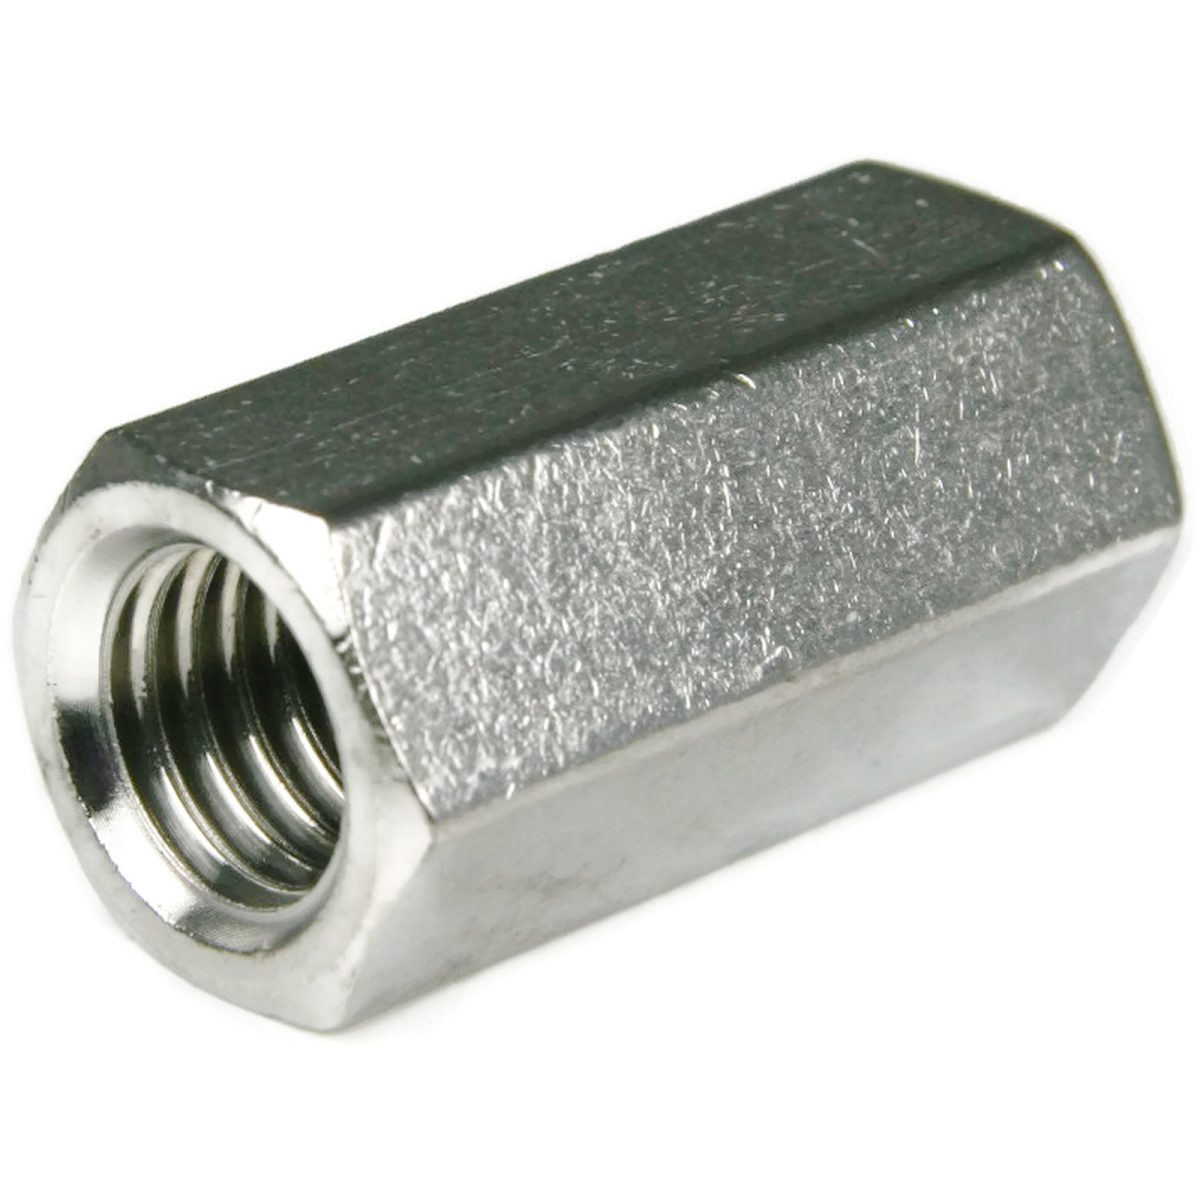 3/8" Threaded Coupling